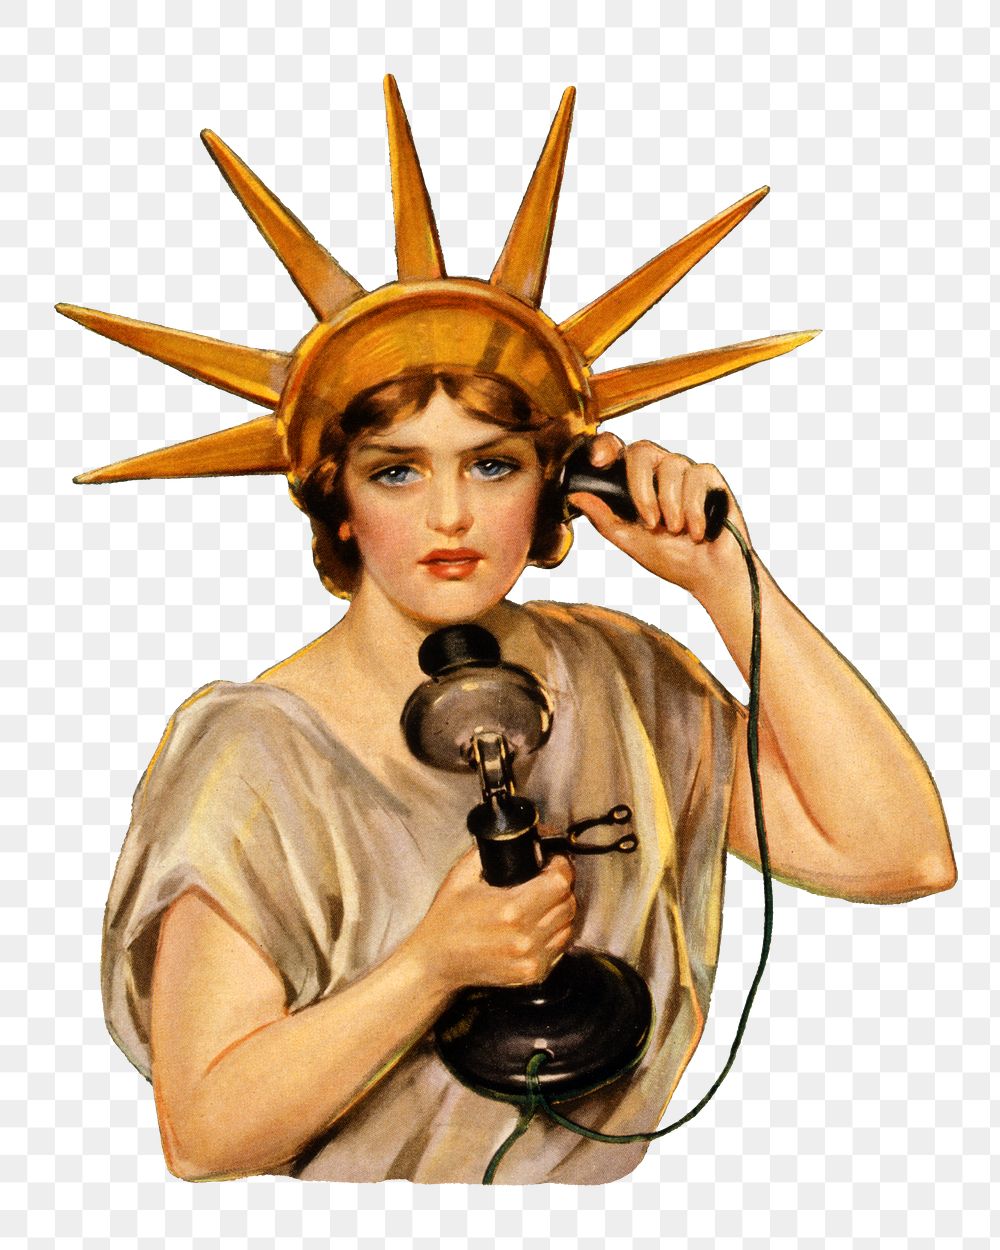 Statue of Liberty png making a call sticker, transparent background.  Remixed by rawpixel.